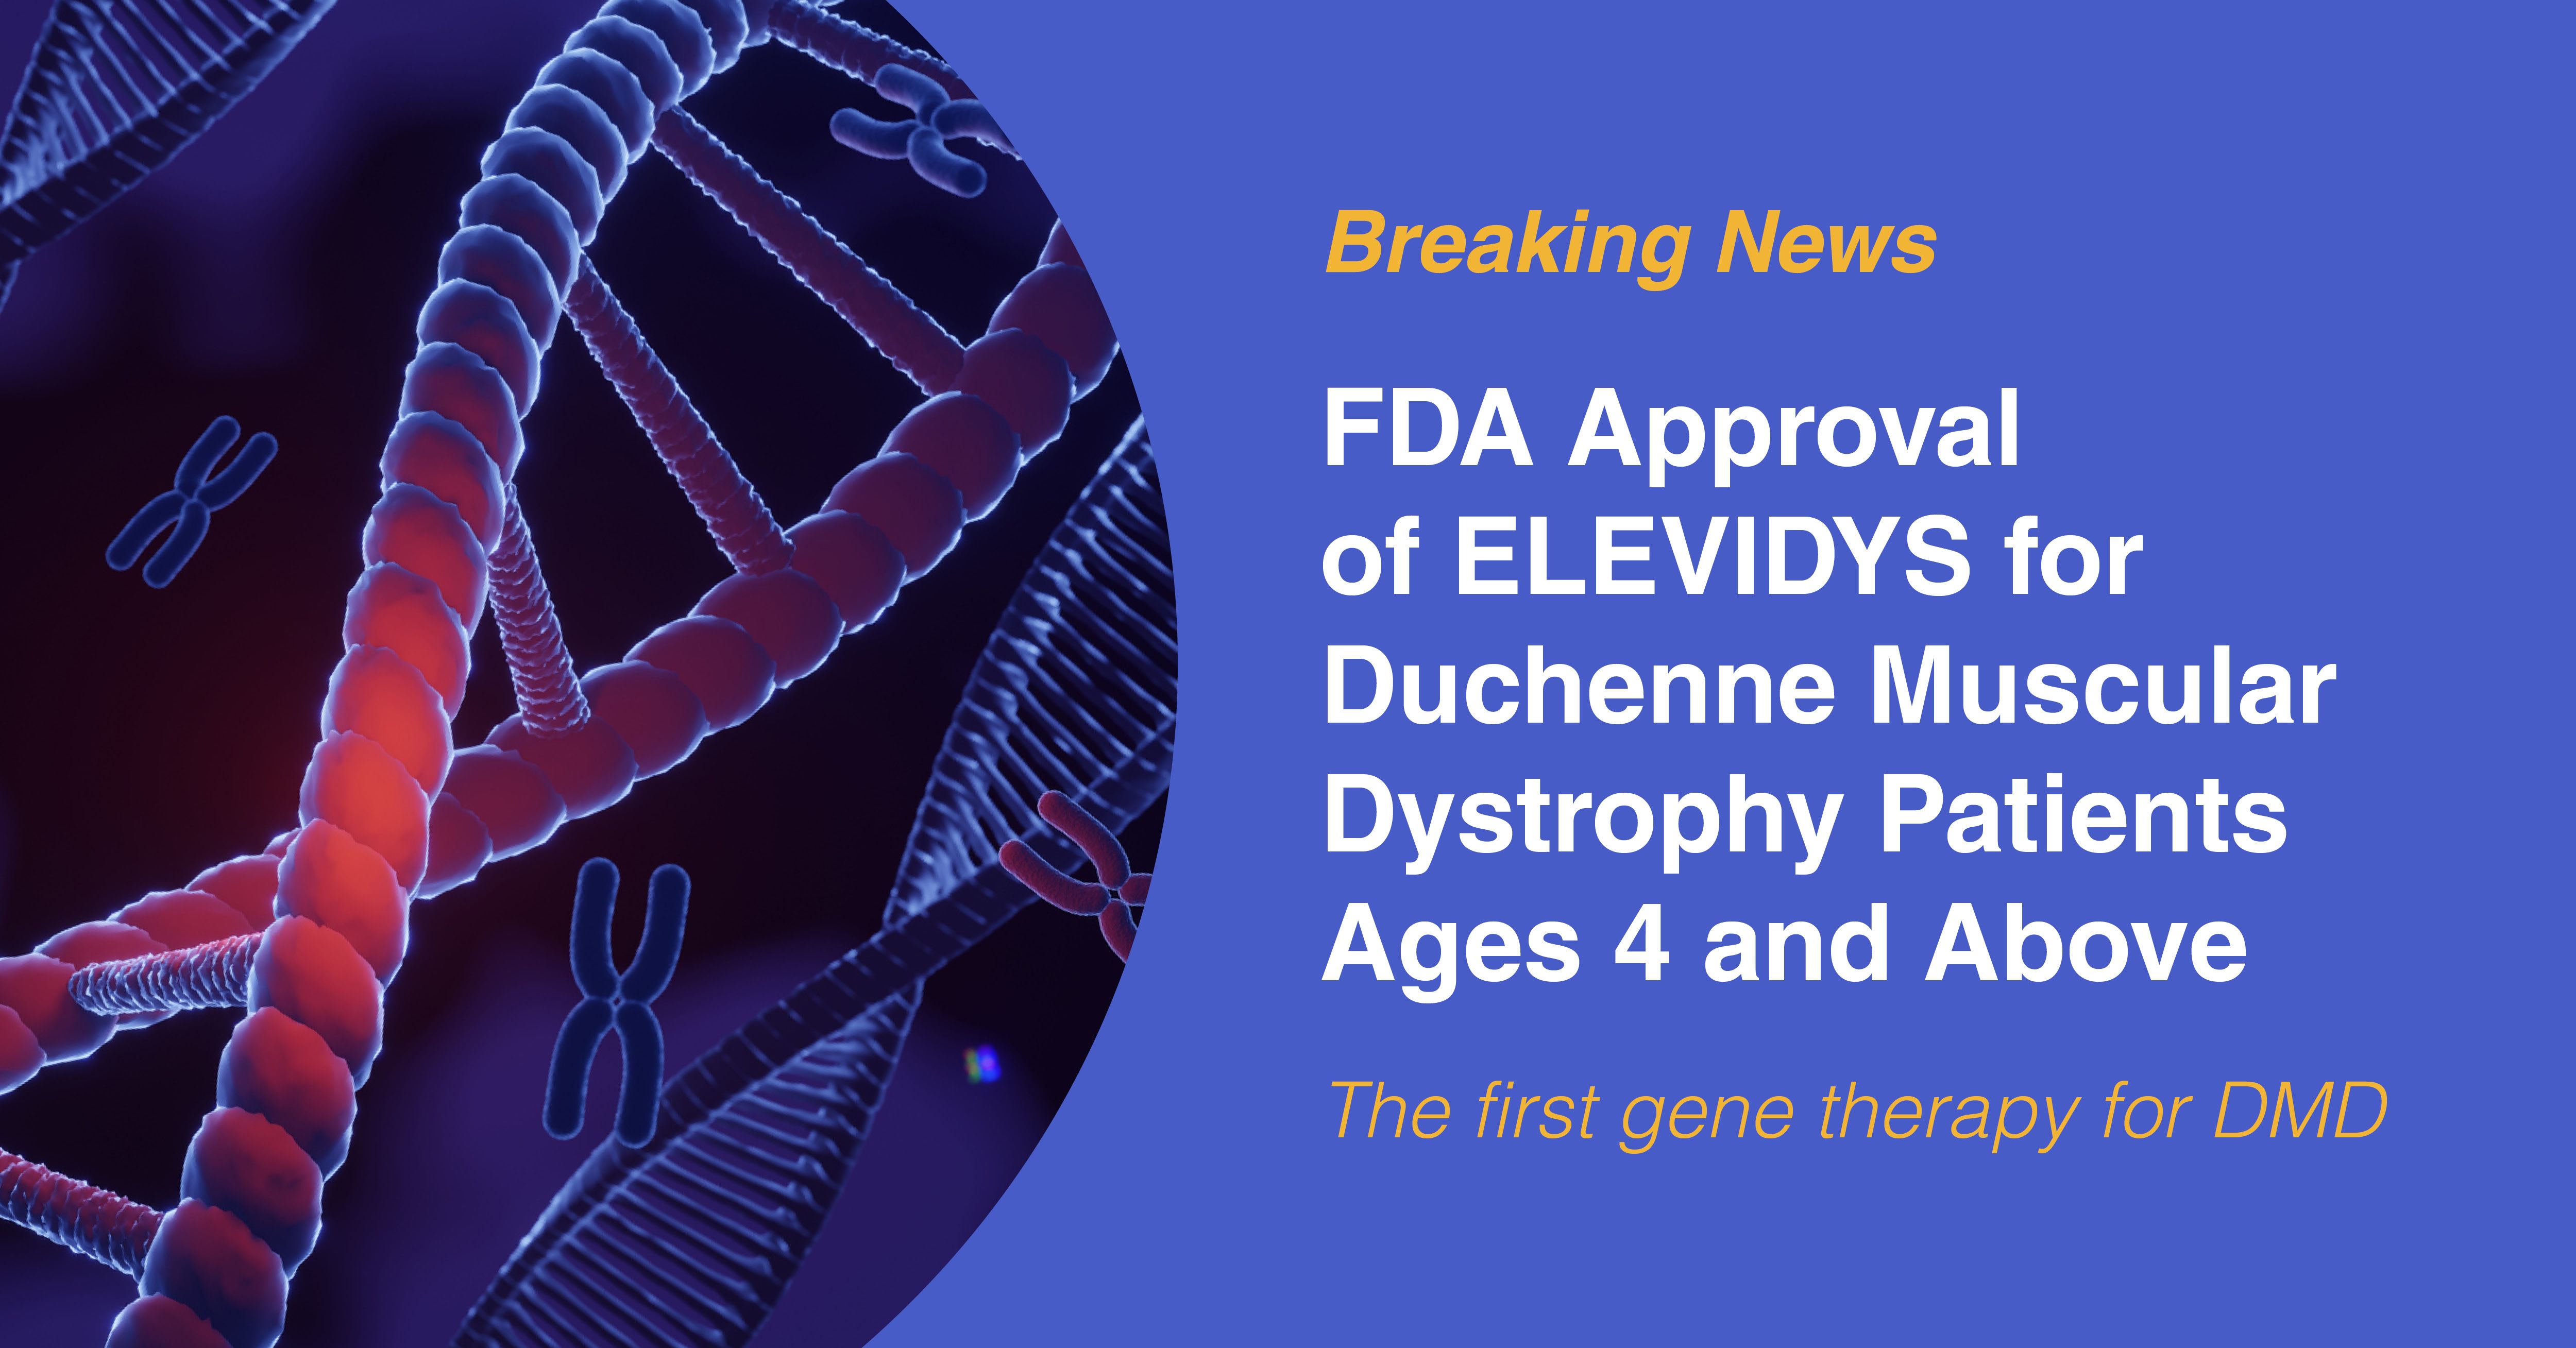 FDA Approval of ELEVIDYS for Duchenne Muscular Dystrophy Patients Ages 4 and Above